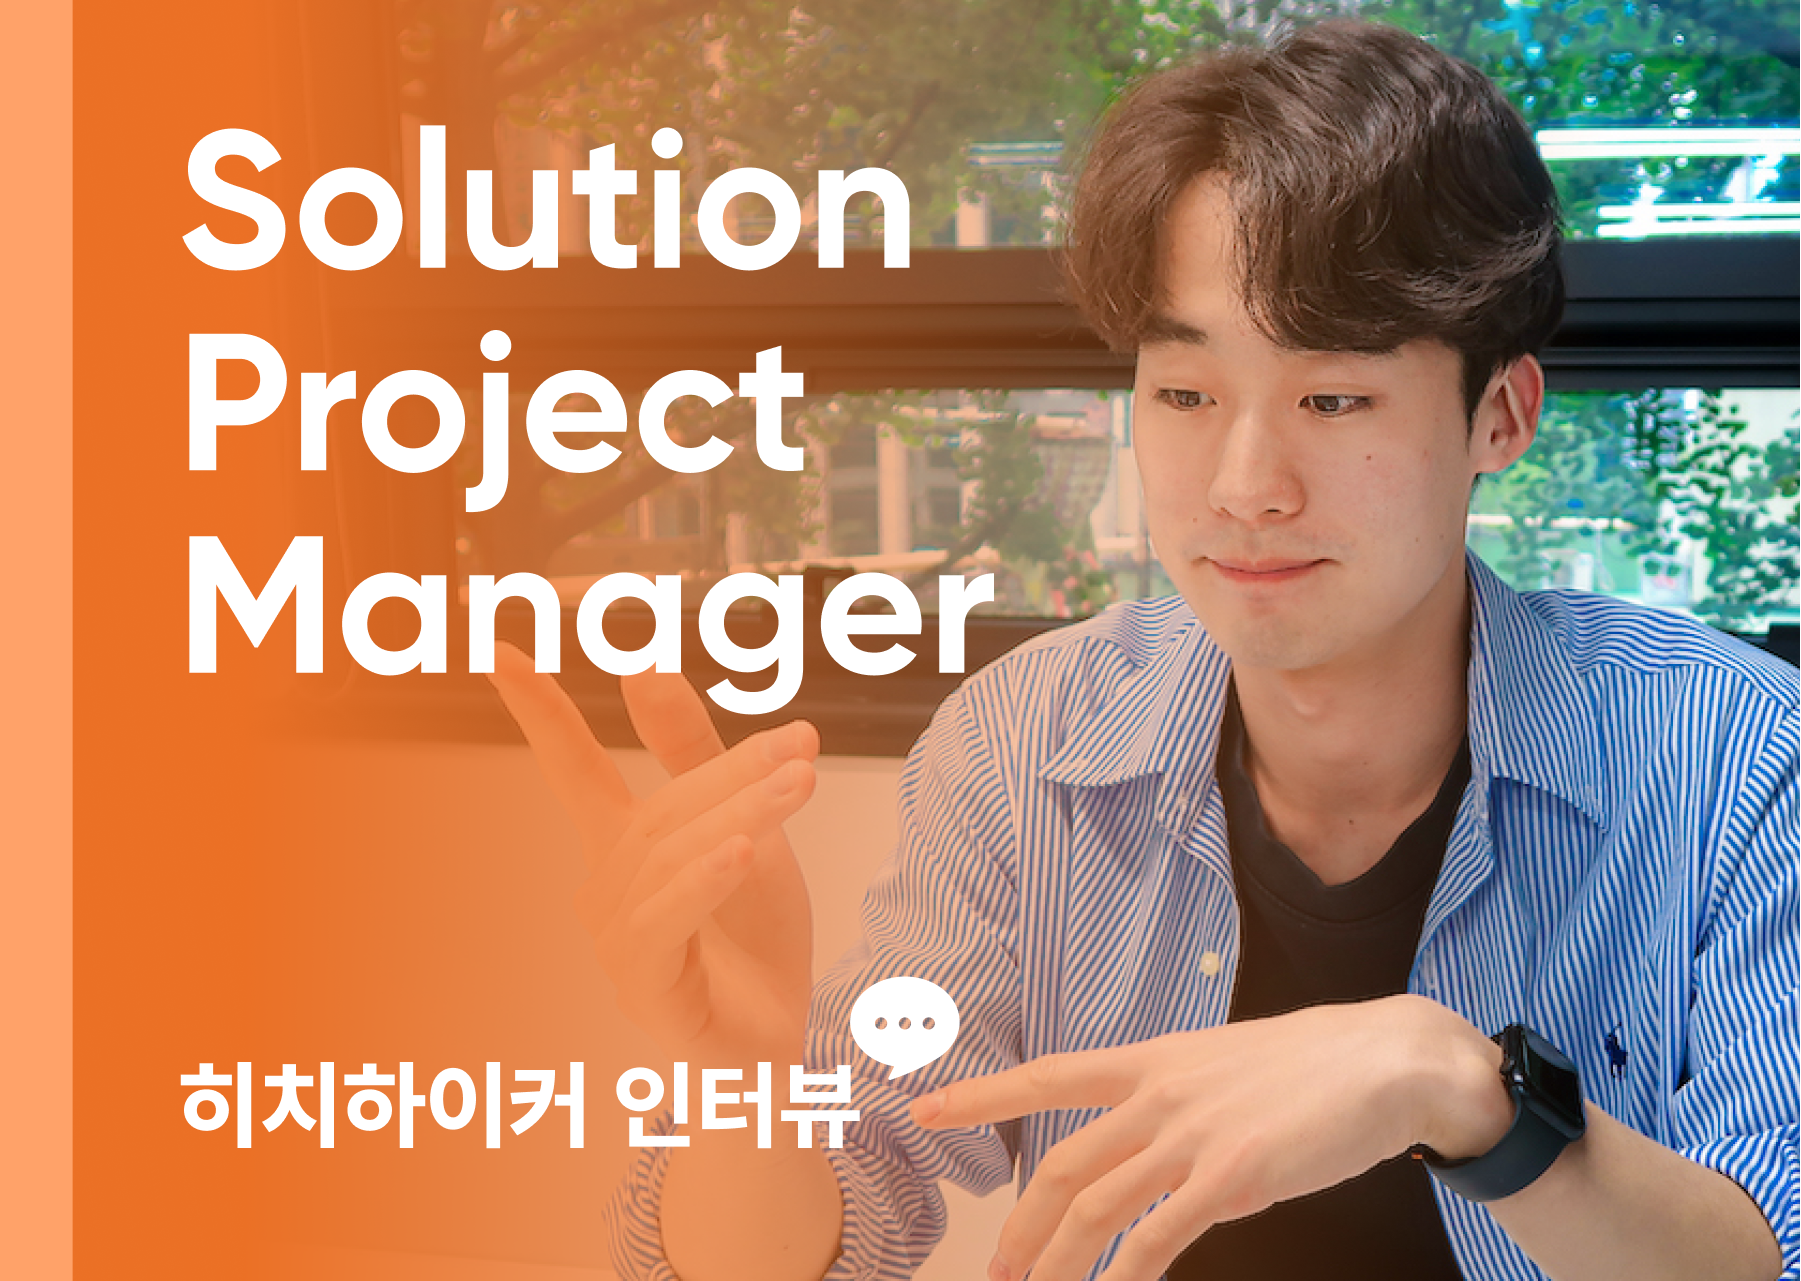 Solution Project Manager 문현석